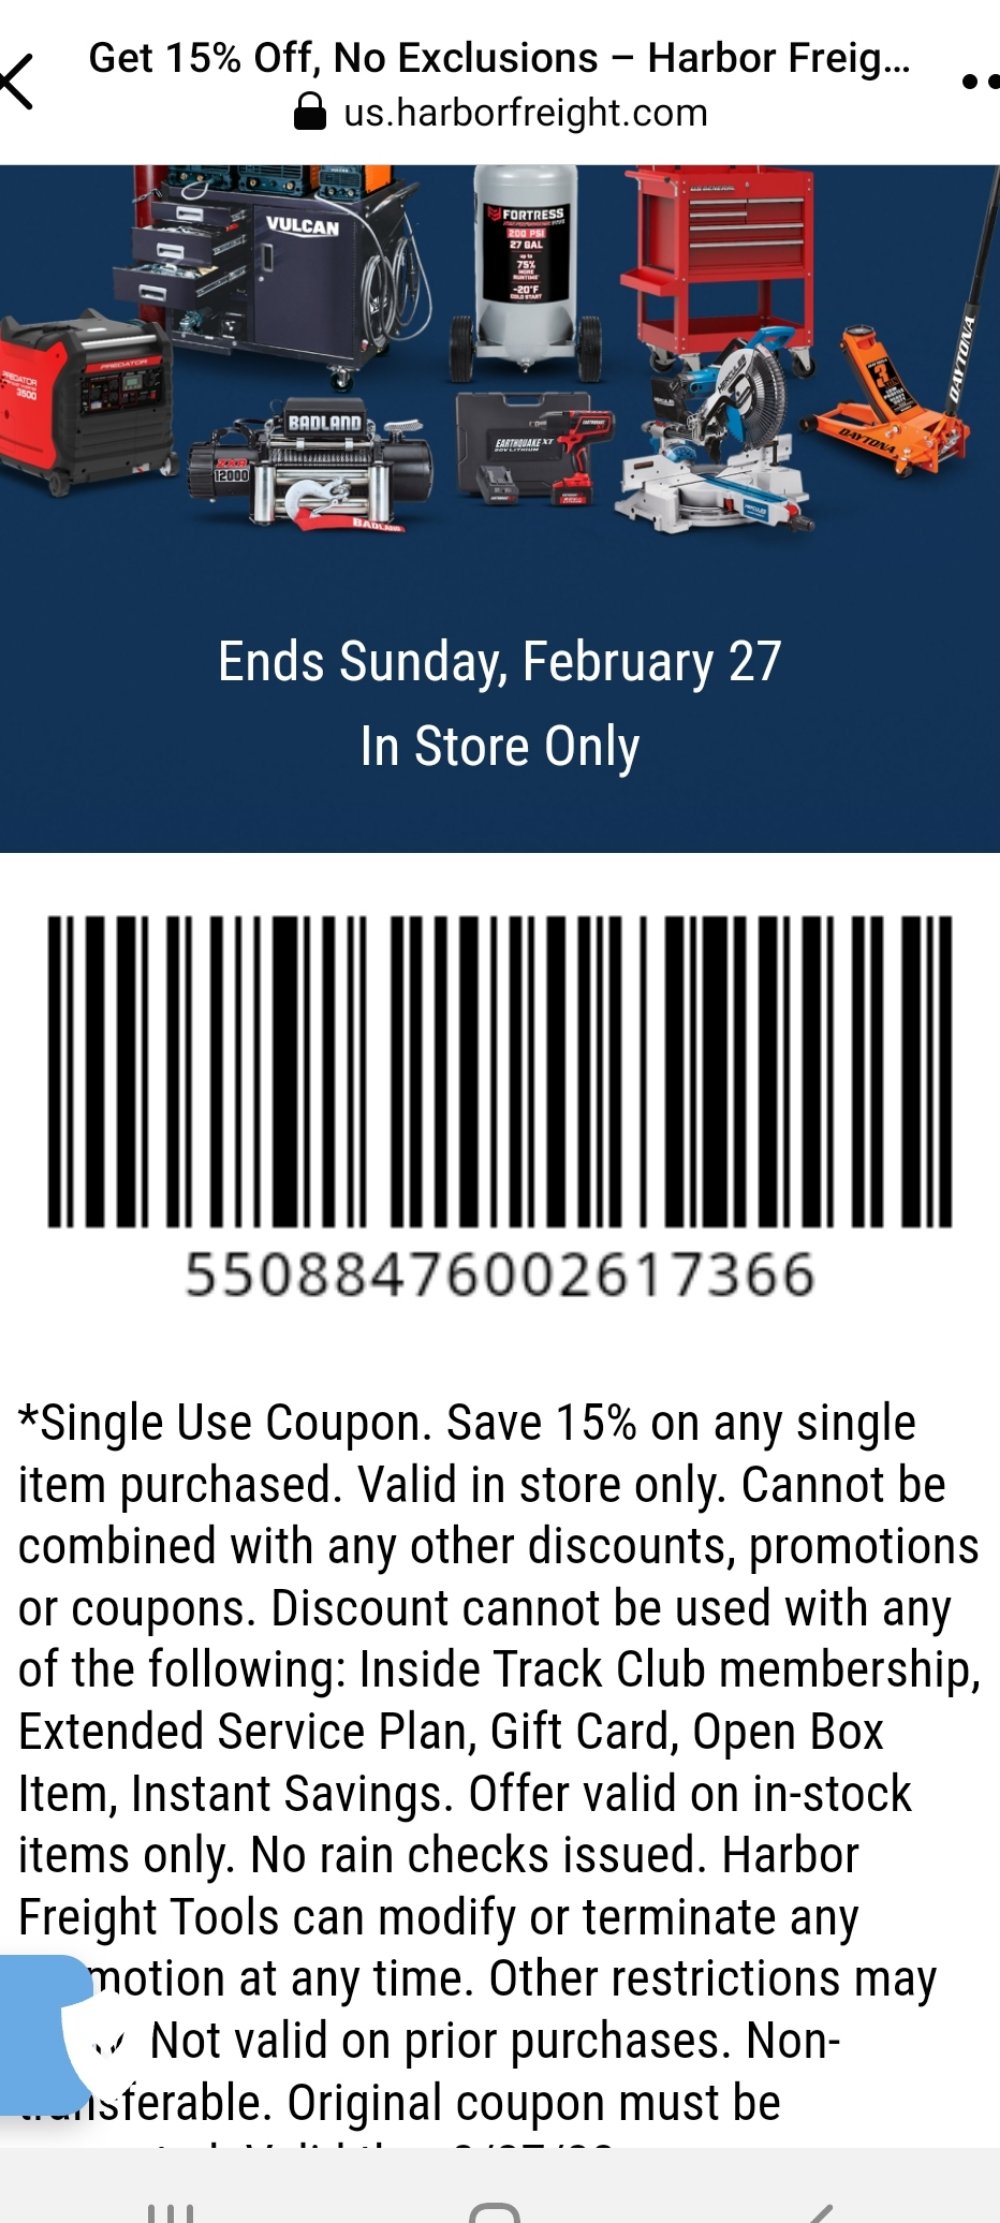 Harbor Freight Coupon, HF Coupons - 15% off